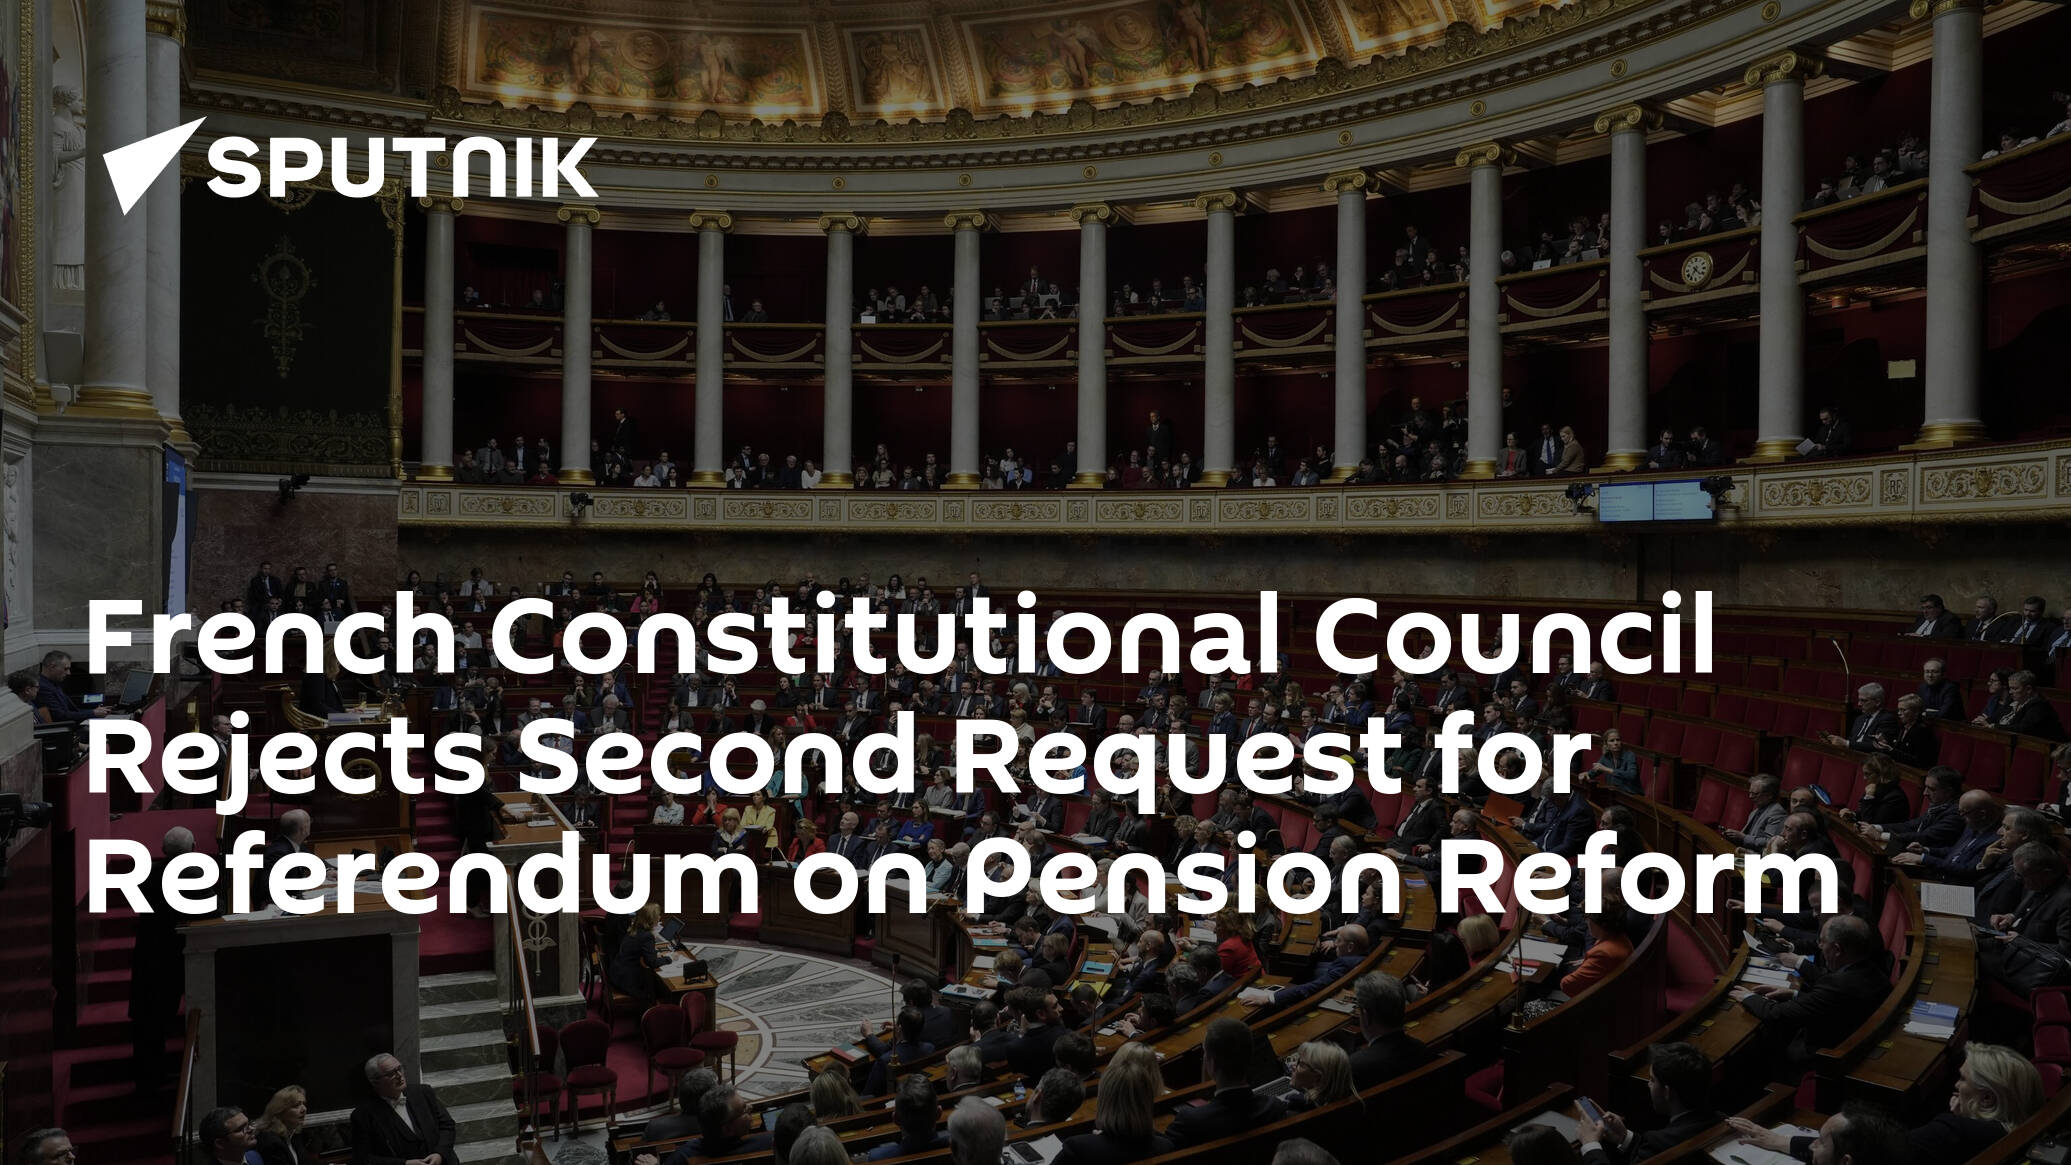 French Constitutional Council Rejects Second Request for Referendum on Pension Reform